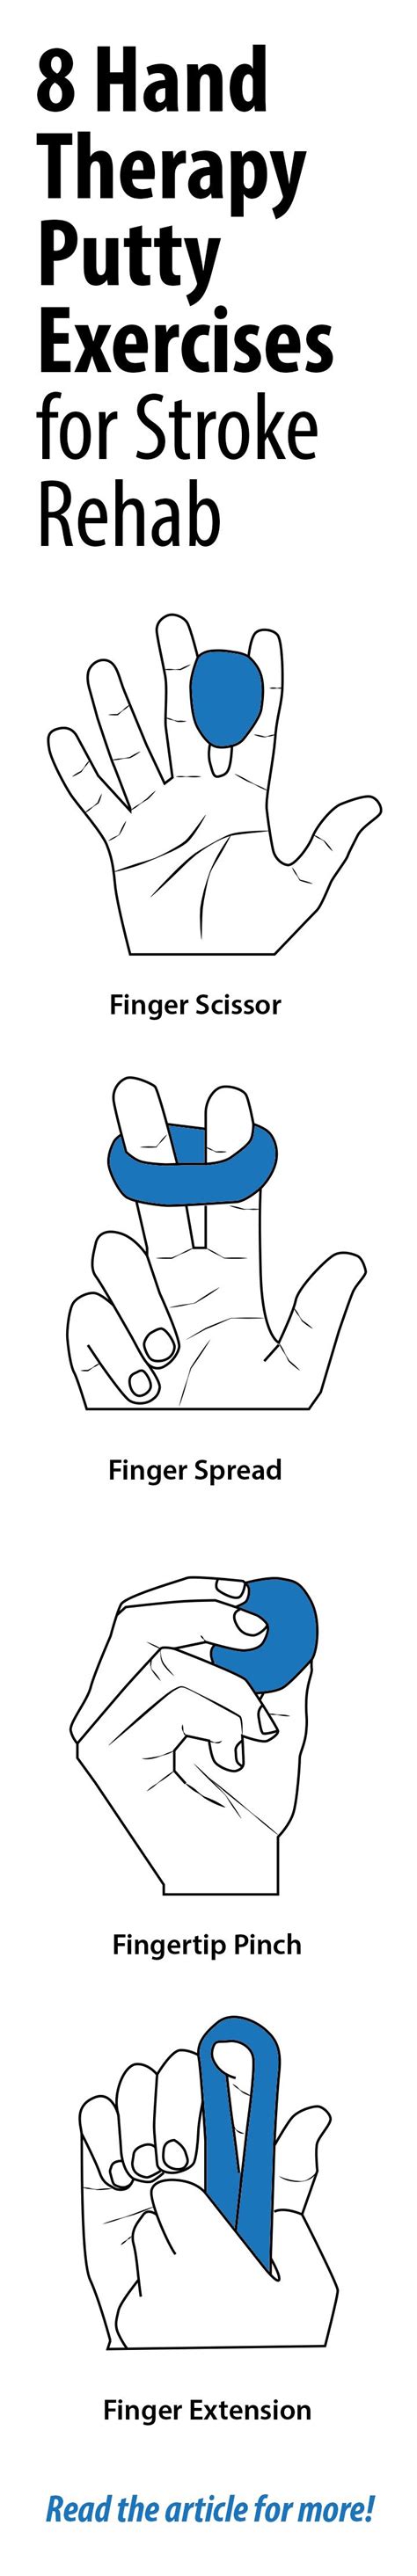 8 Hand Therapy Putty Exercises Free Pdf Träning